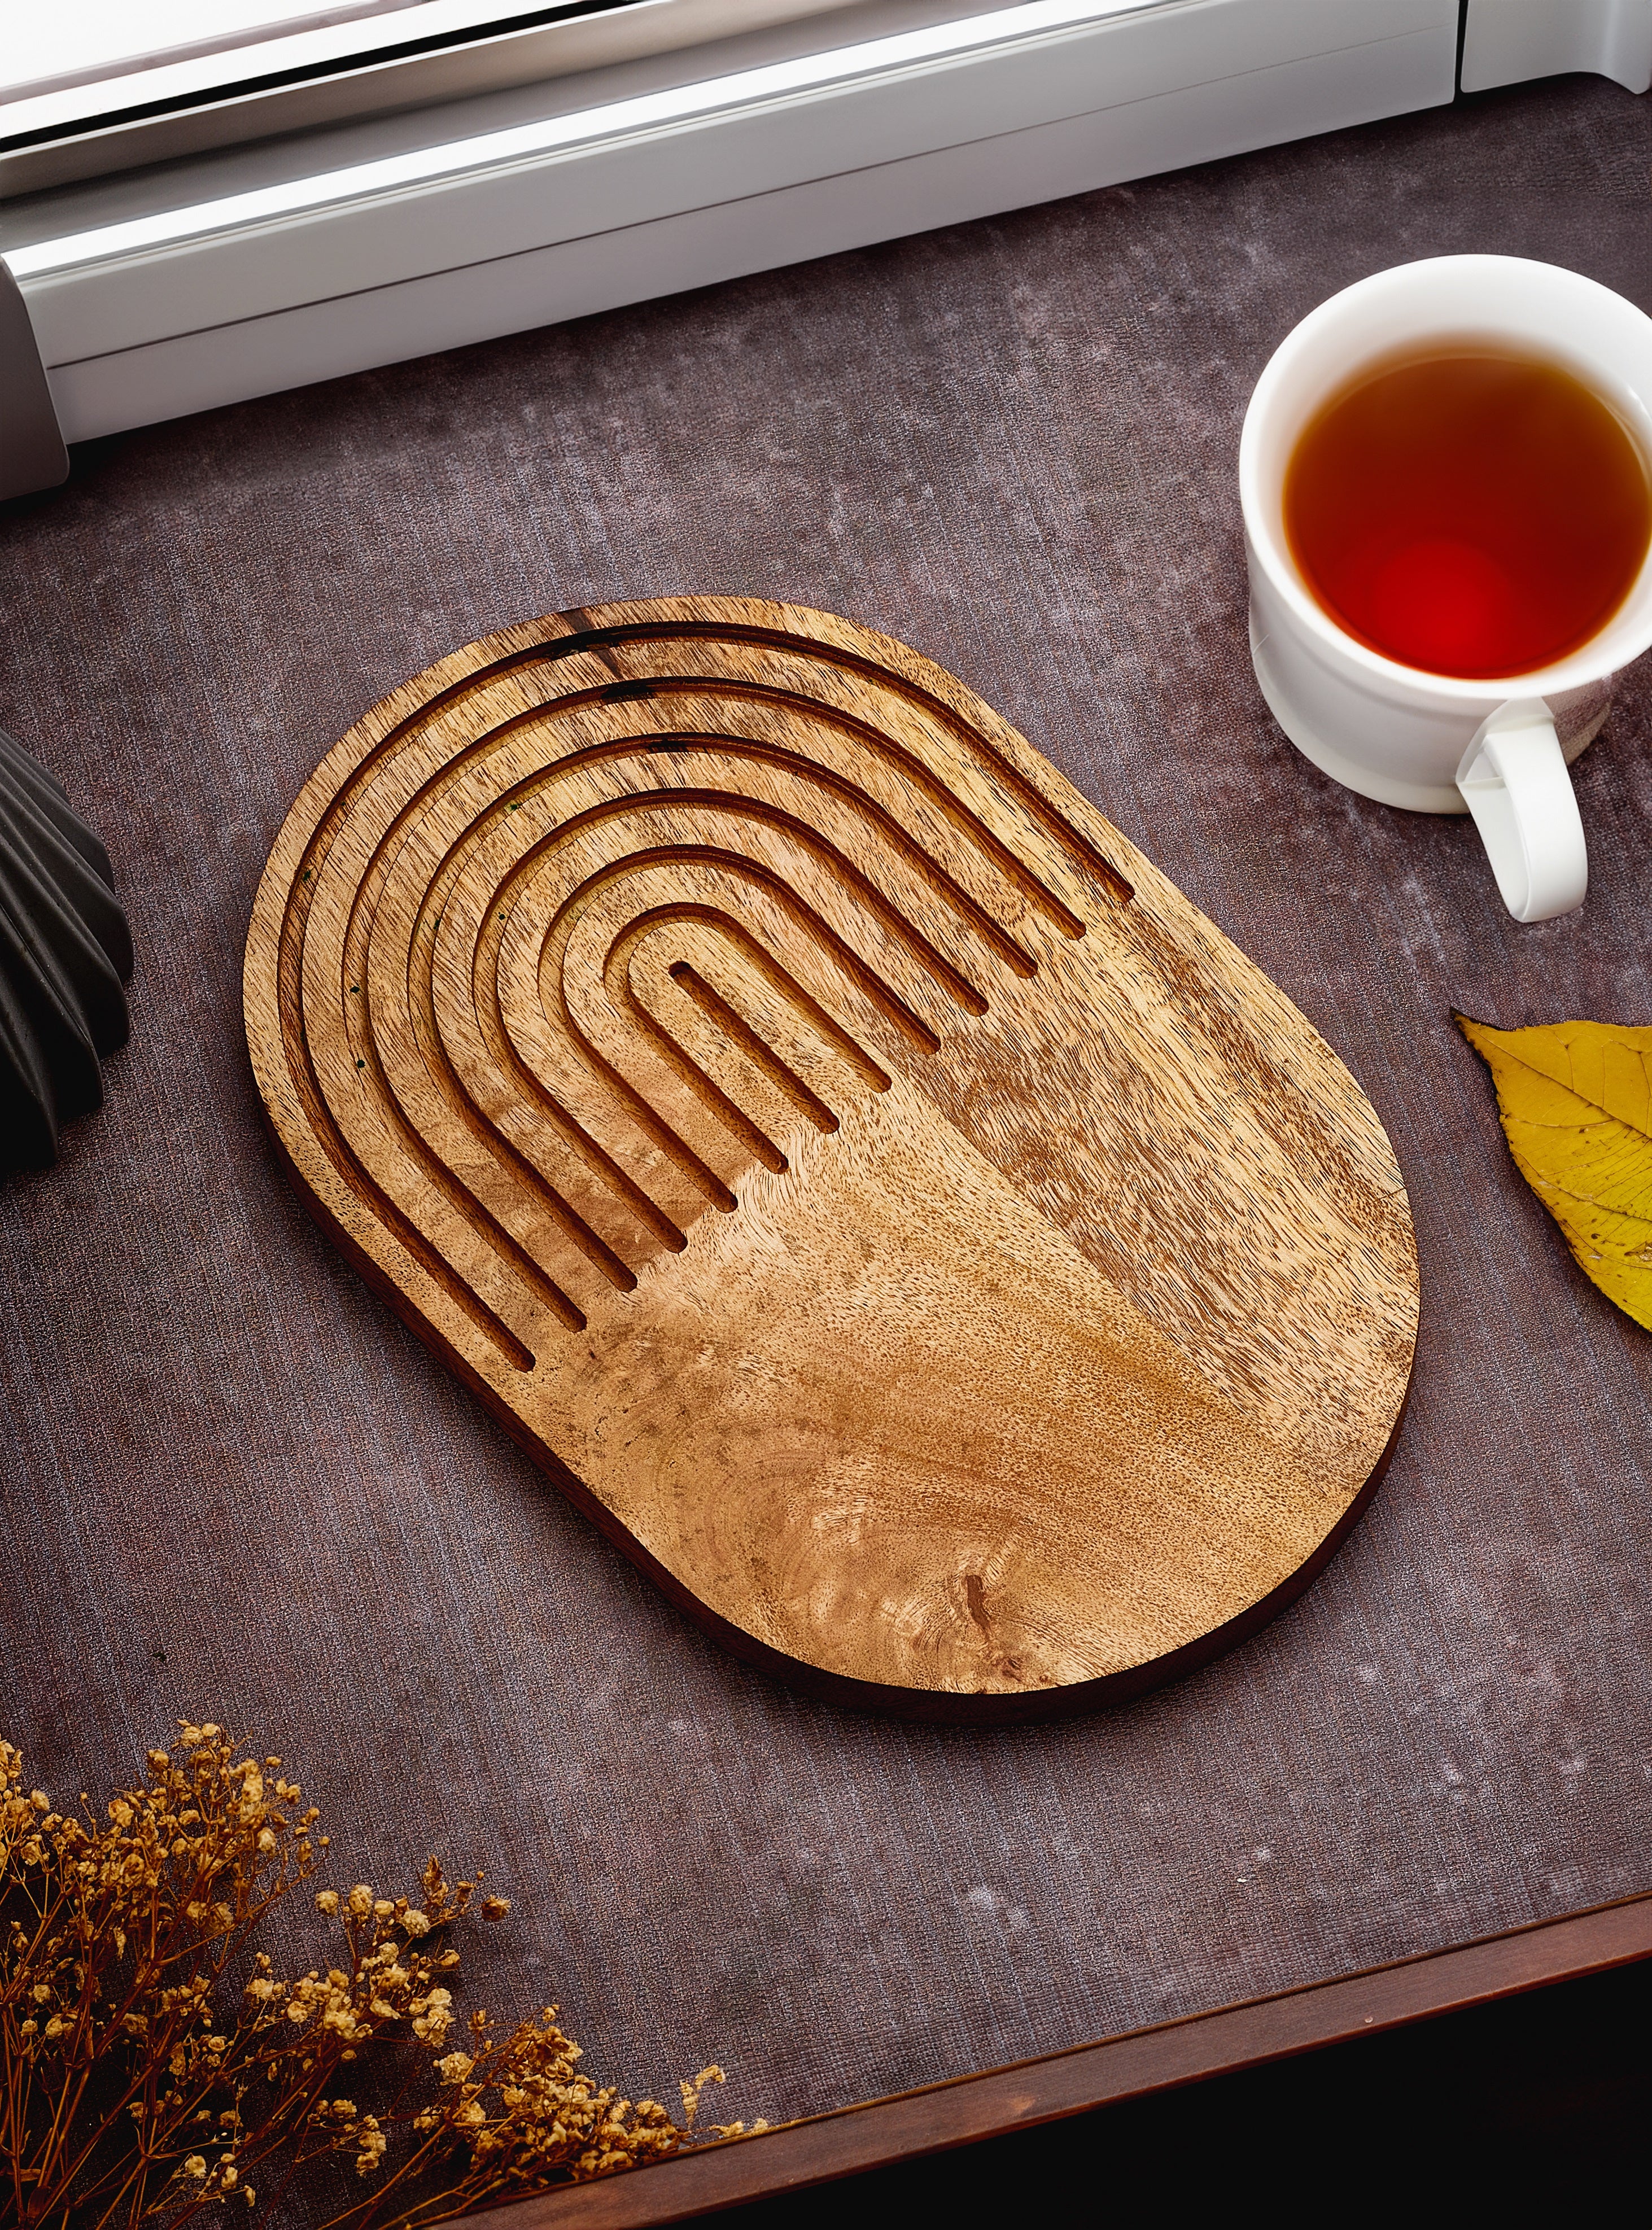 HANDCRAFTED WOODEN OVAL PLATTER